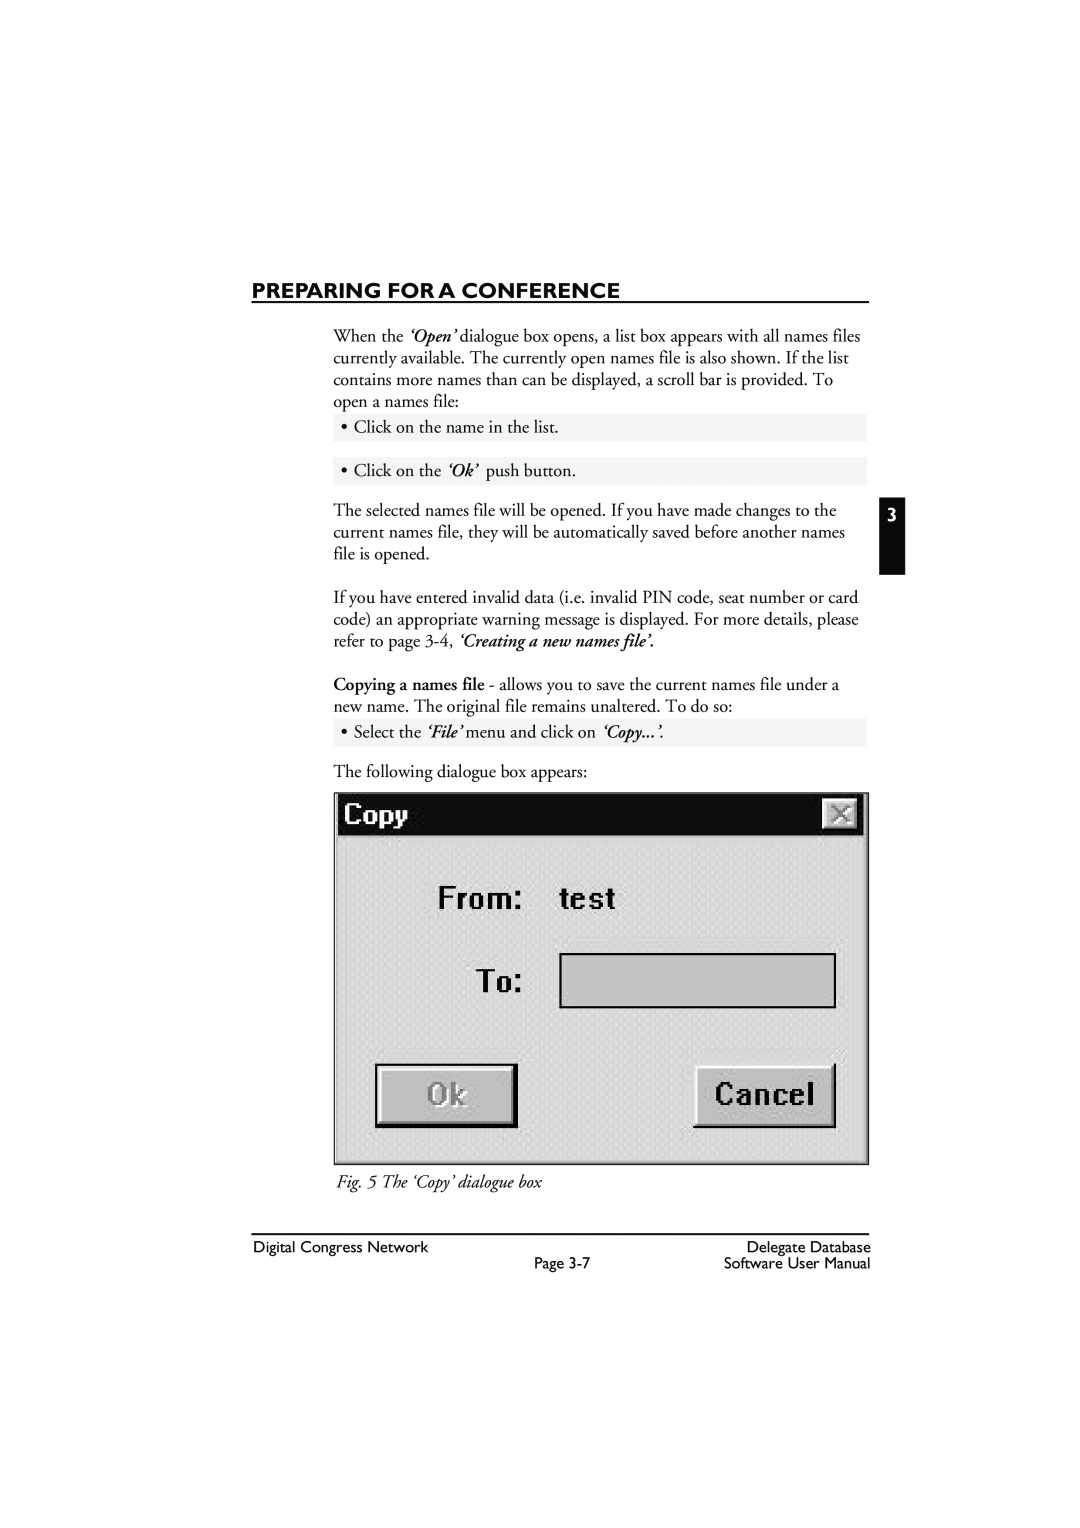 Bosch Appliances LBB3580 user manual The ‘Copy’ dialogue box, Preparing For A Conference, Click on the name in the list 